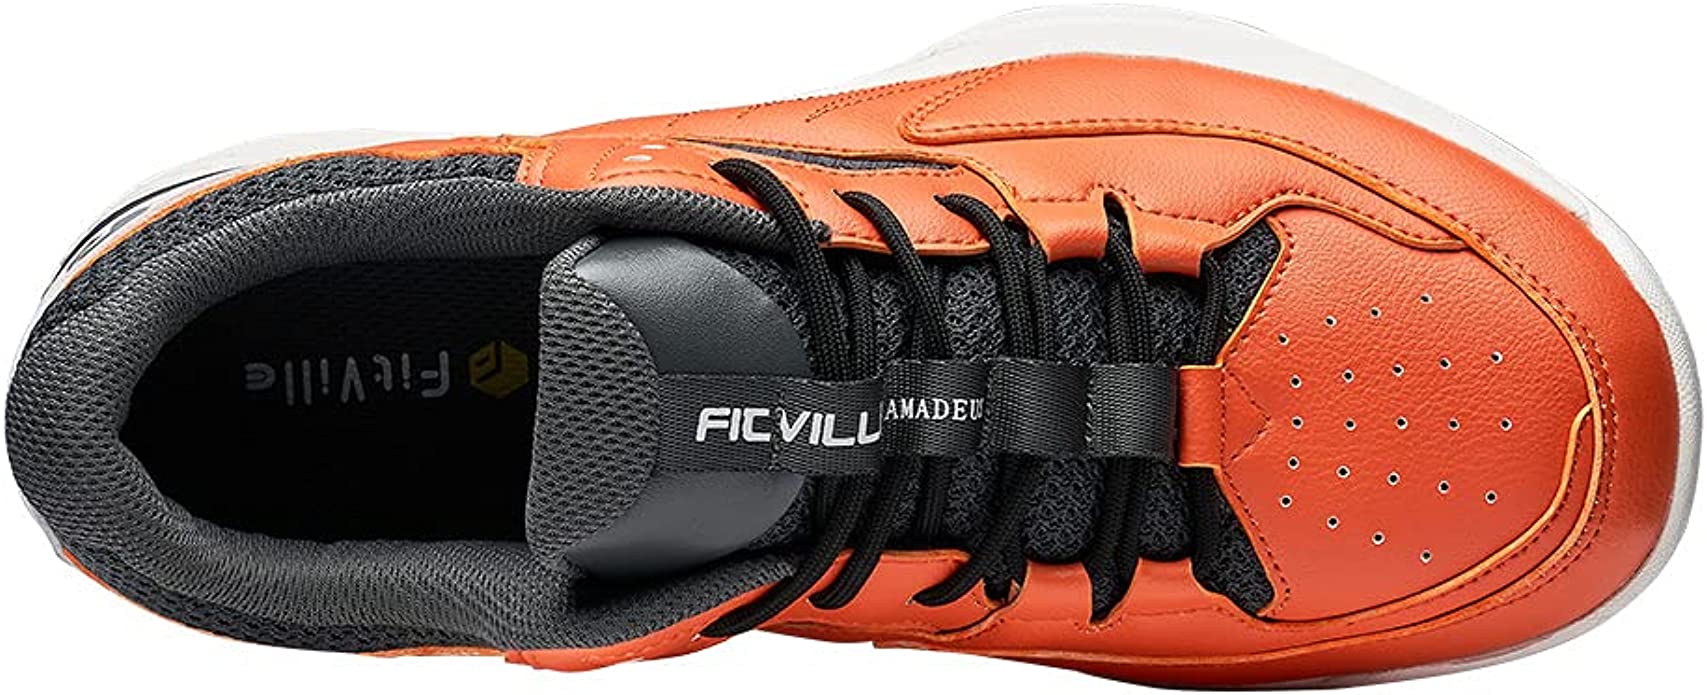 Top view of FitVille Wide Pickleball Shoe for Men. Image credit: Amazon